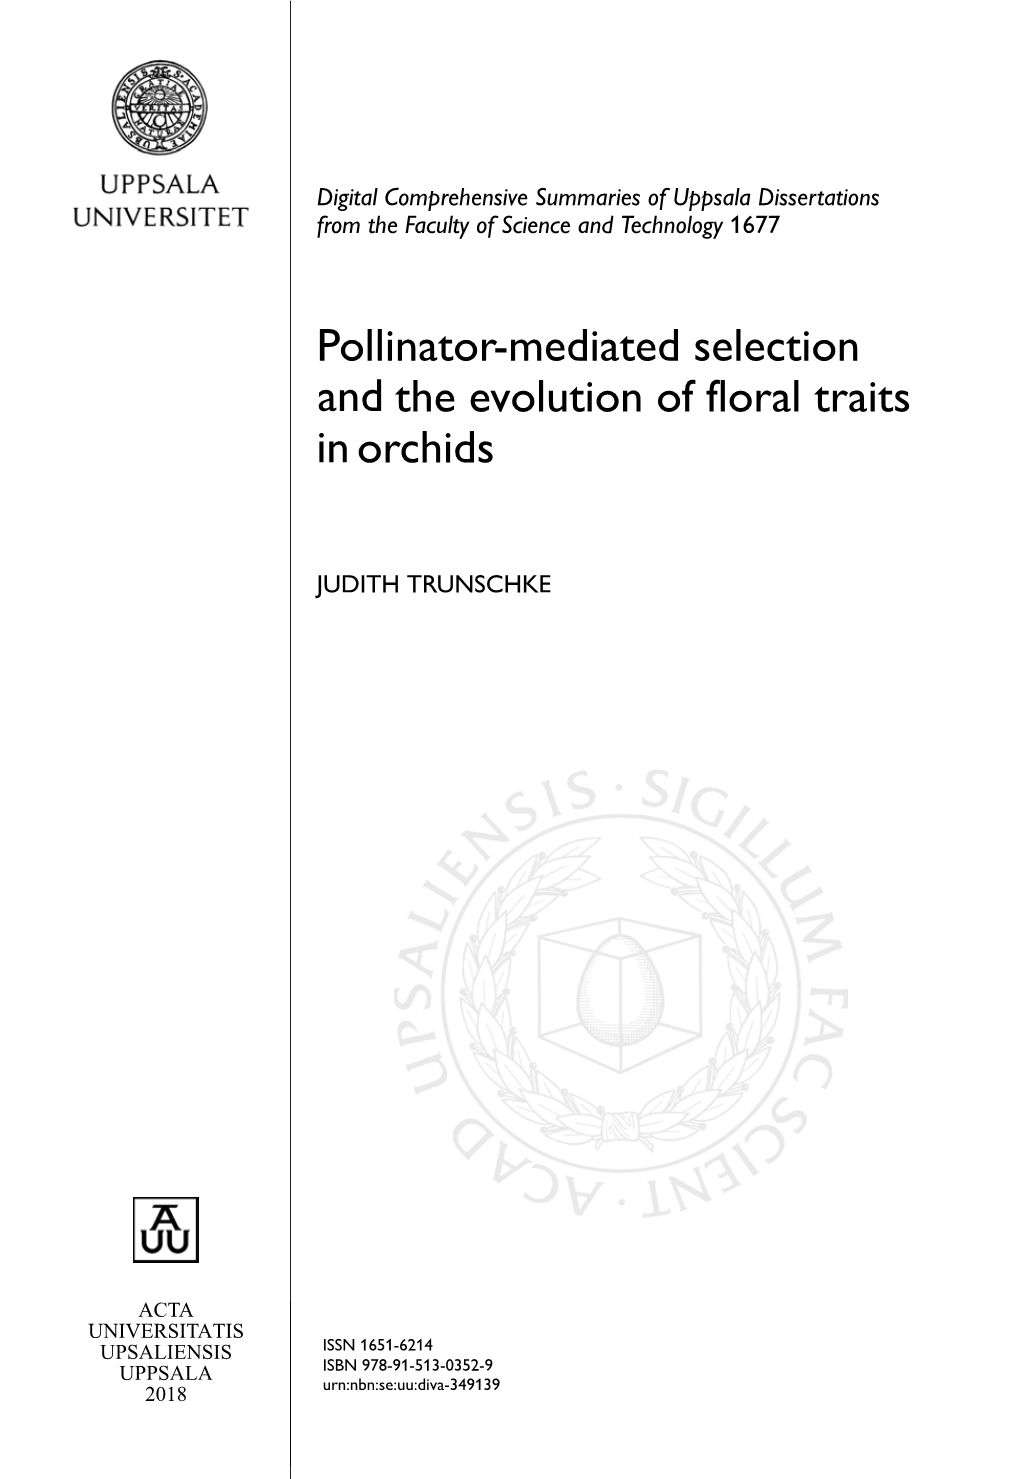 Pollinator-Mediated Selection and the Evolution of Floral Traits Inorchids